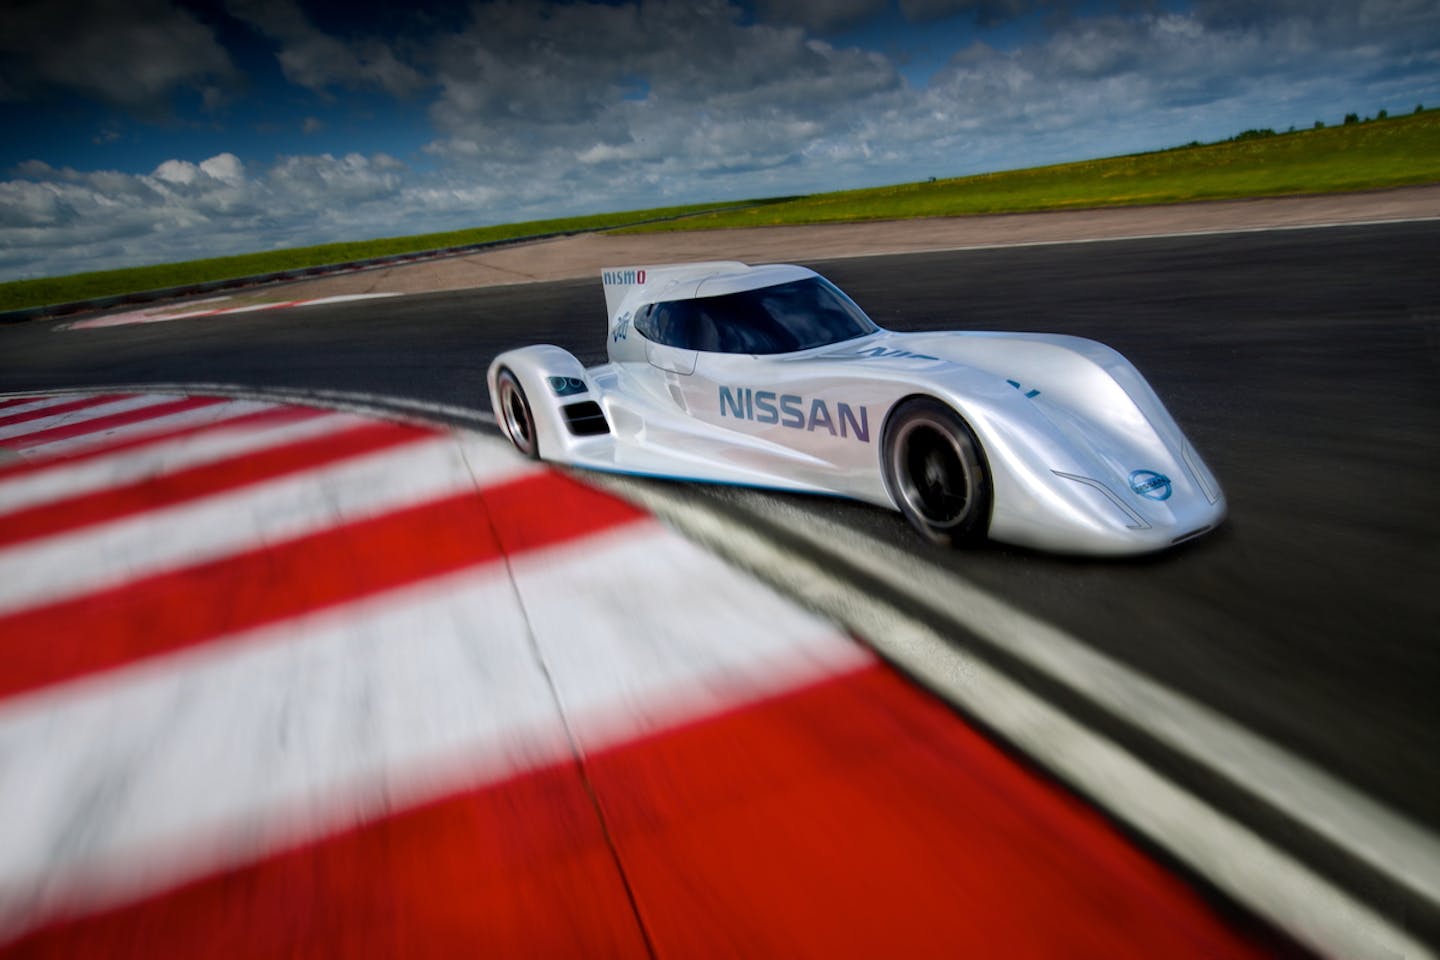 Nissan electrifies next Le Mans with world's fastest electric